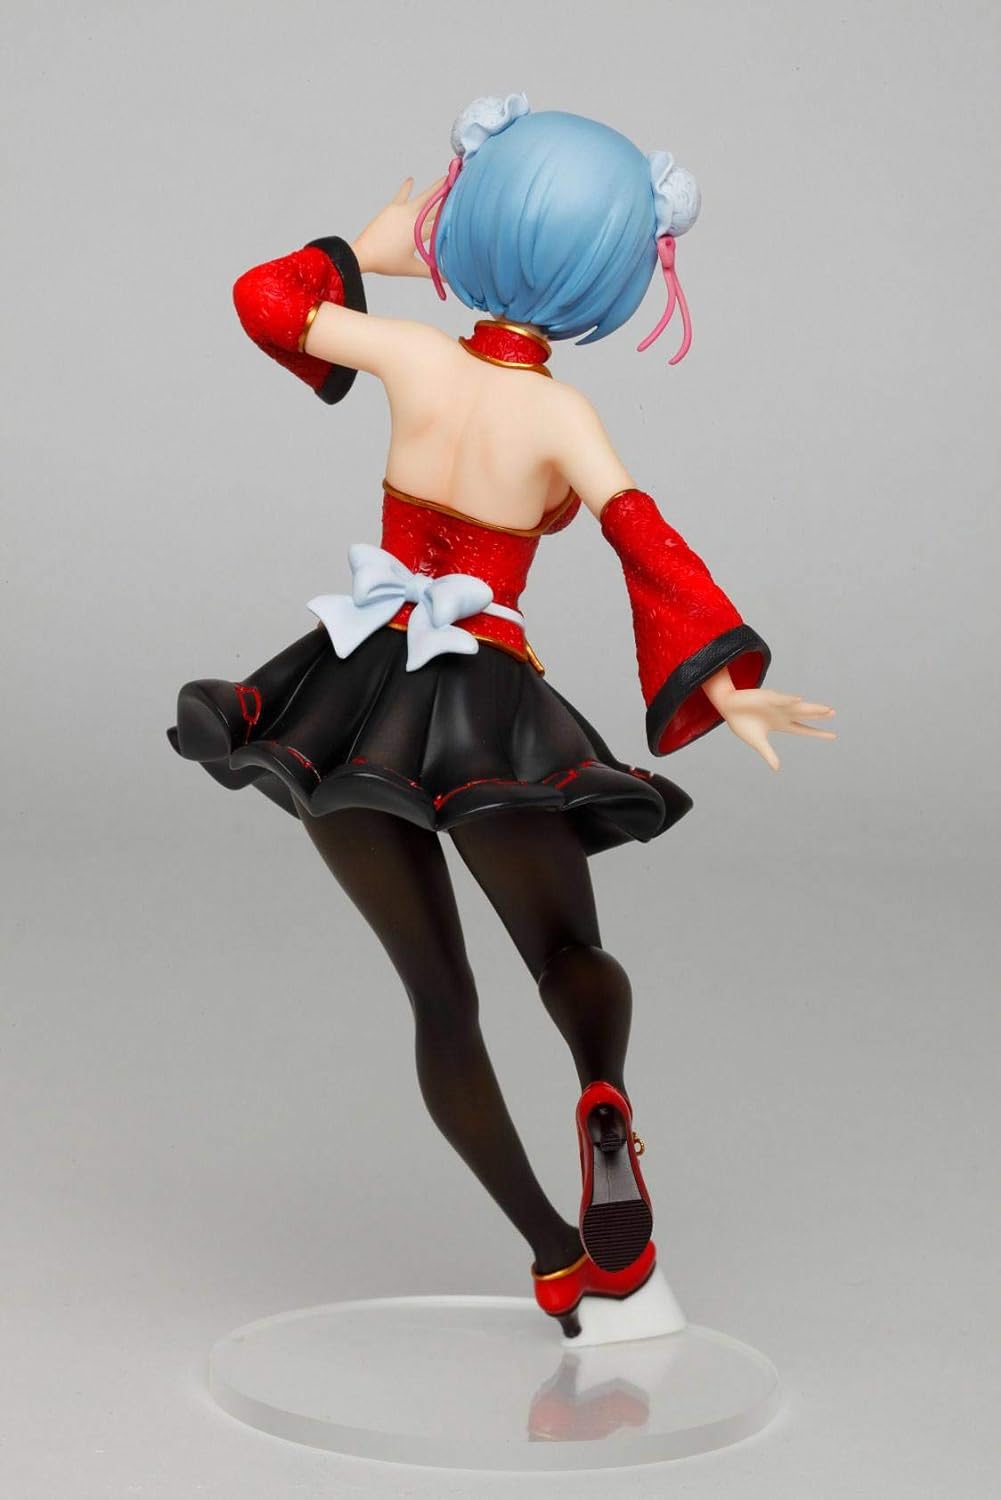 Re:Zero - Starting Life in Another World - Precious Figures - Rem - China Maid Ver. | animota